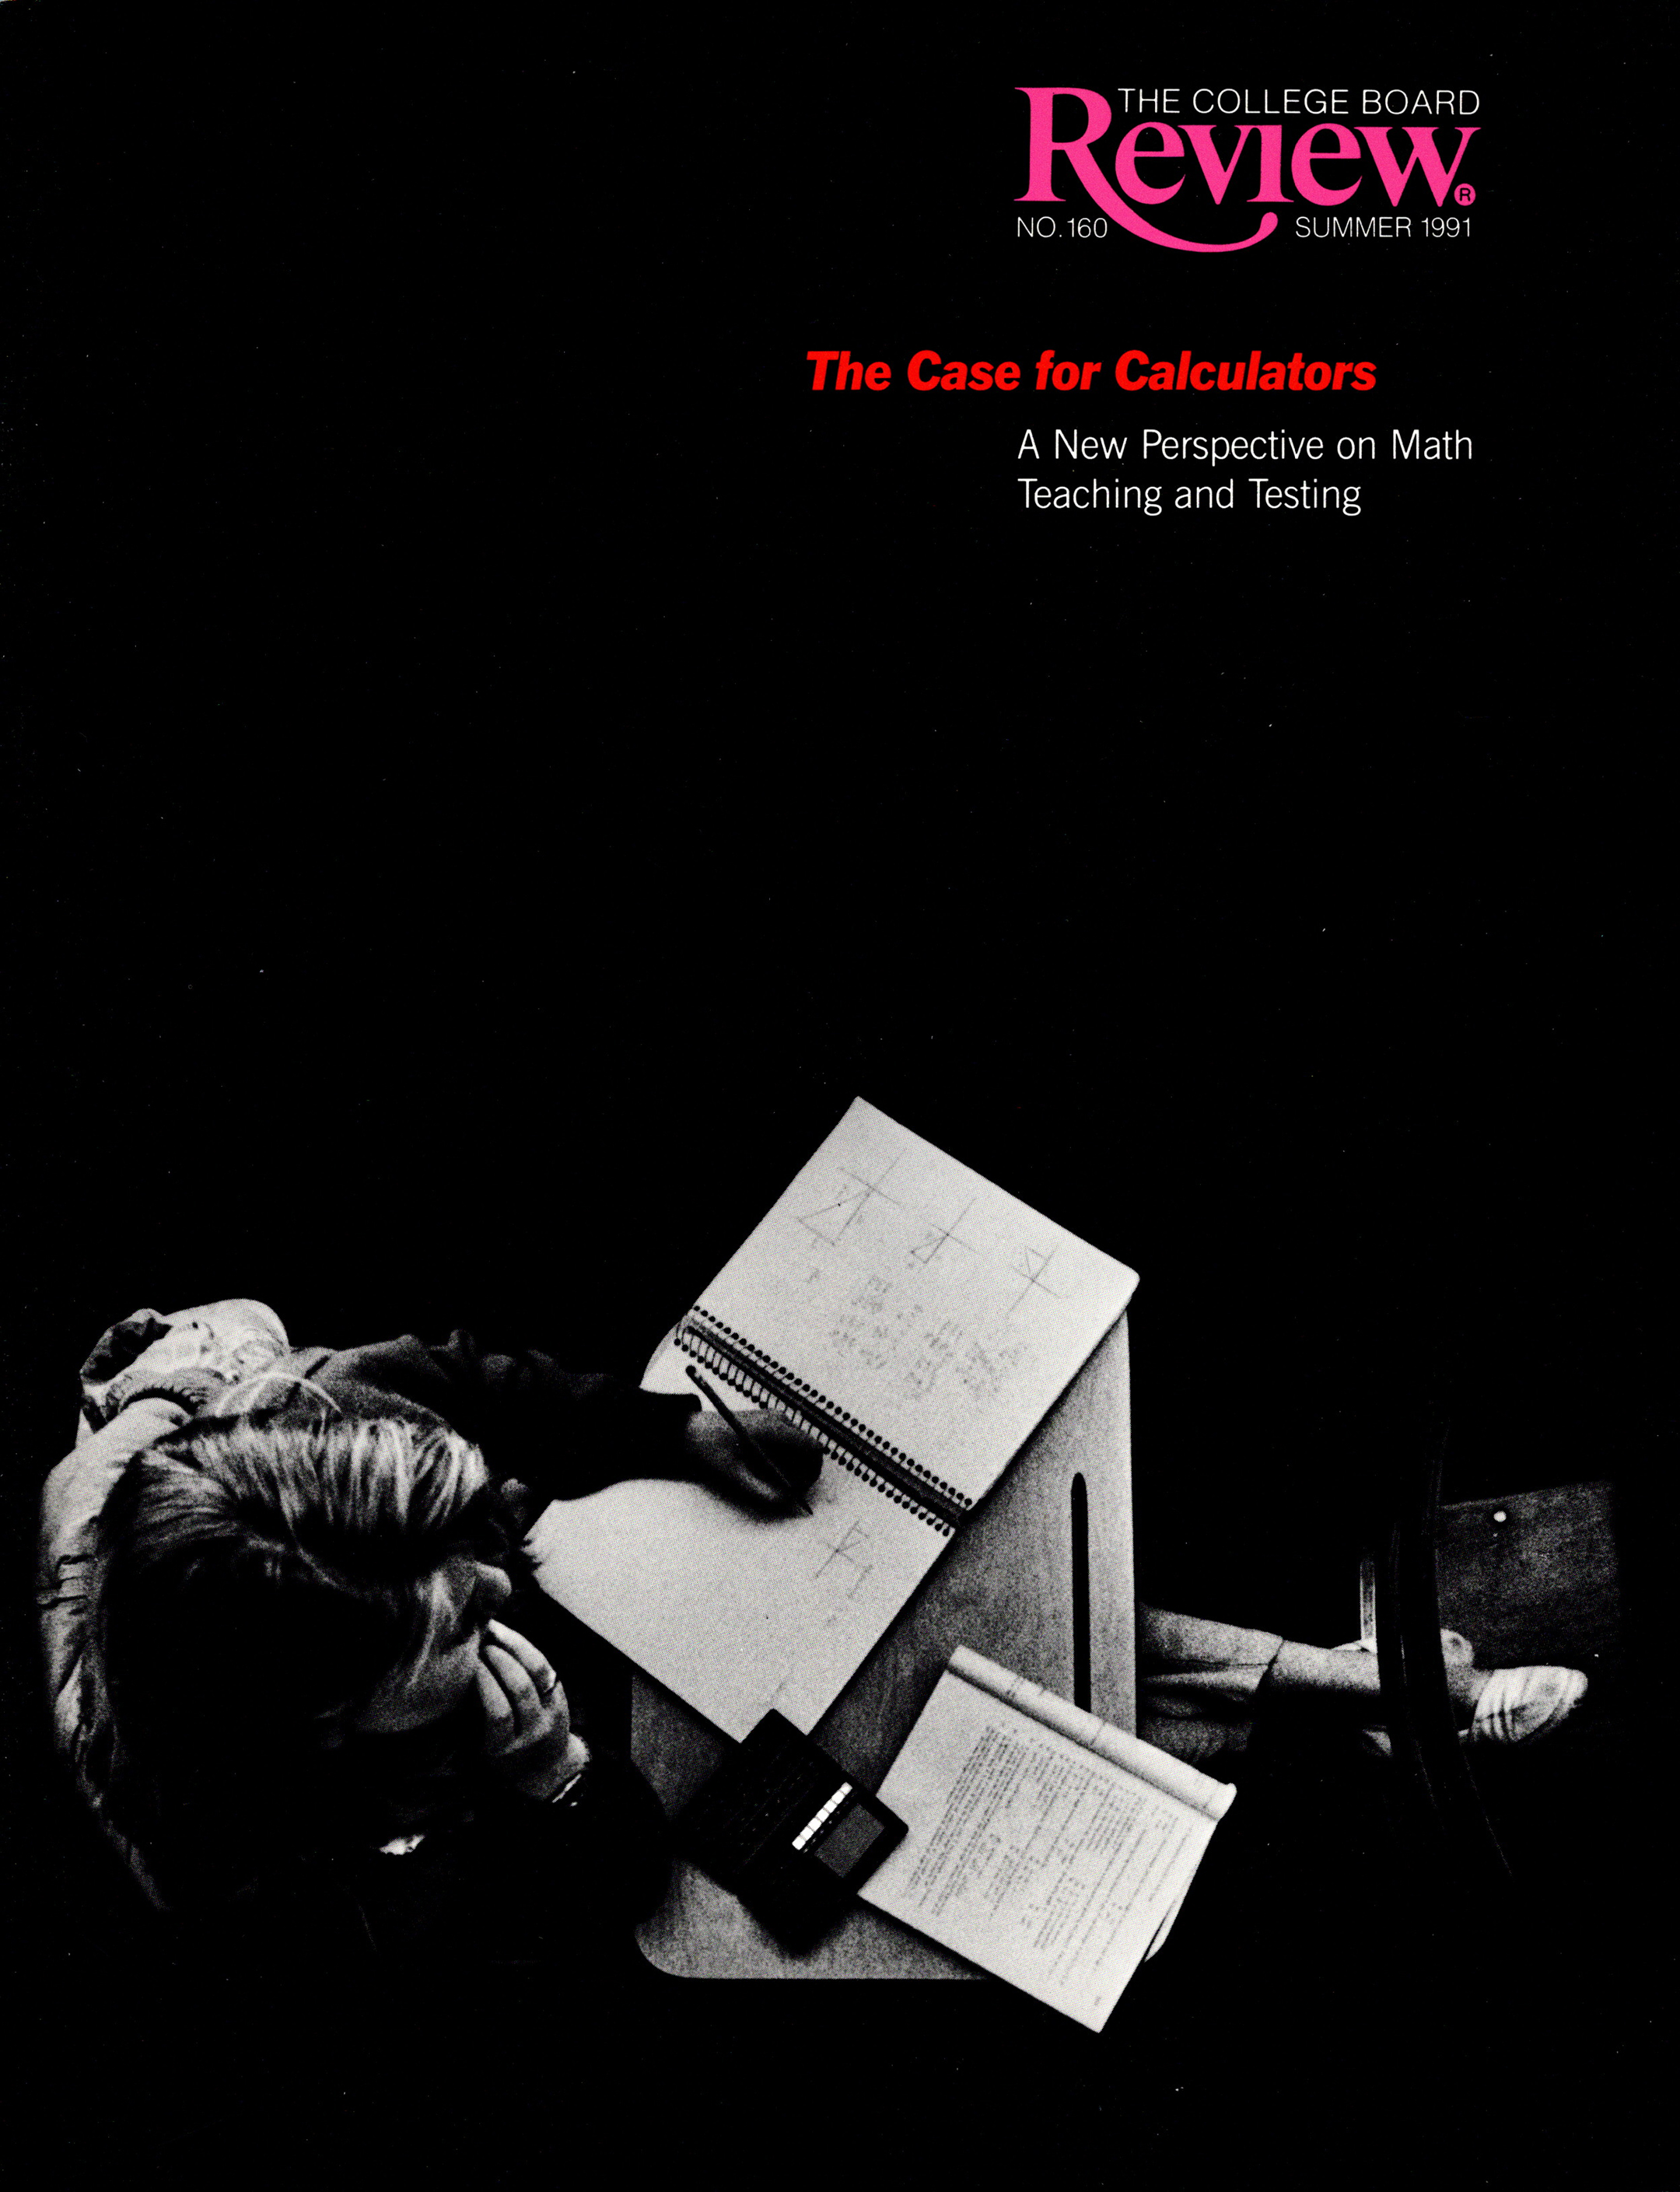 Cover of the Summer 1991 issue of the College Board Review magazine